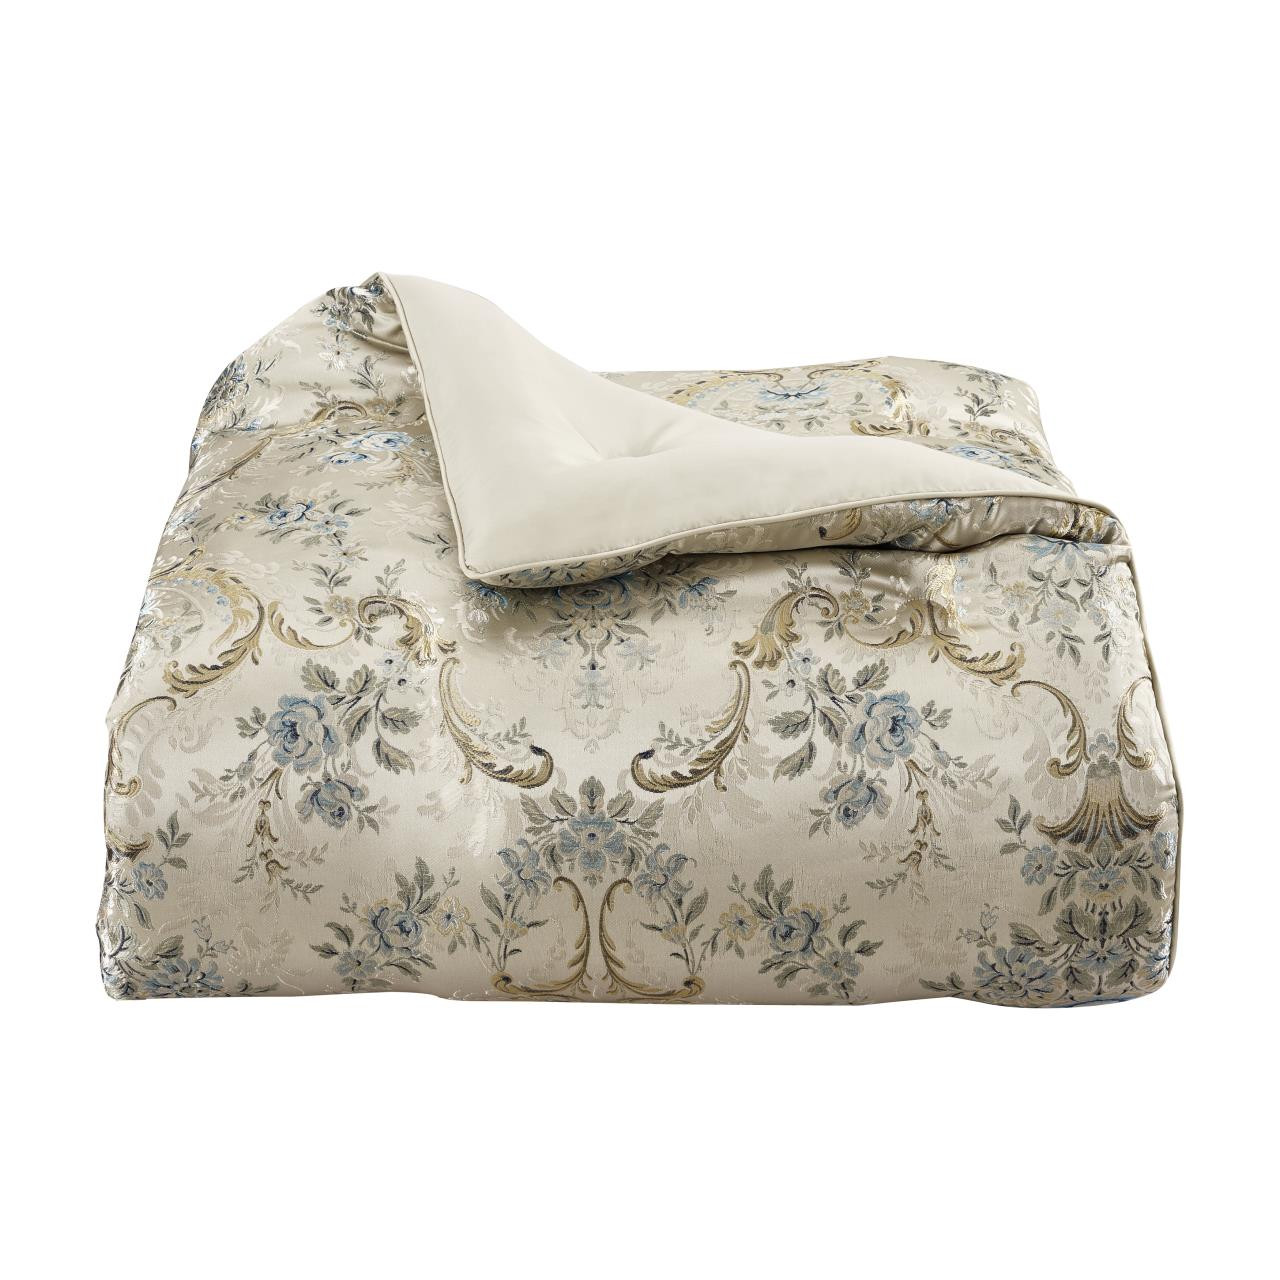 Jacqueline Teal Comforter Collection - http://images.salsif